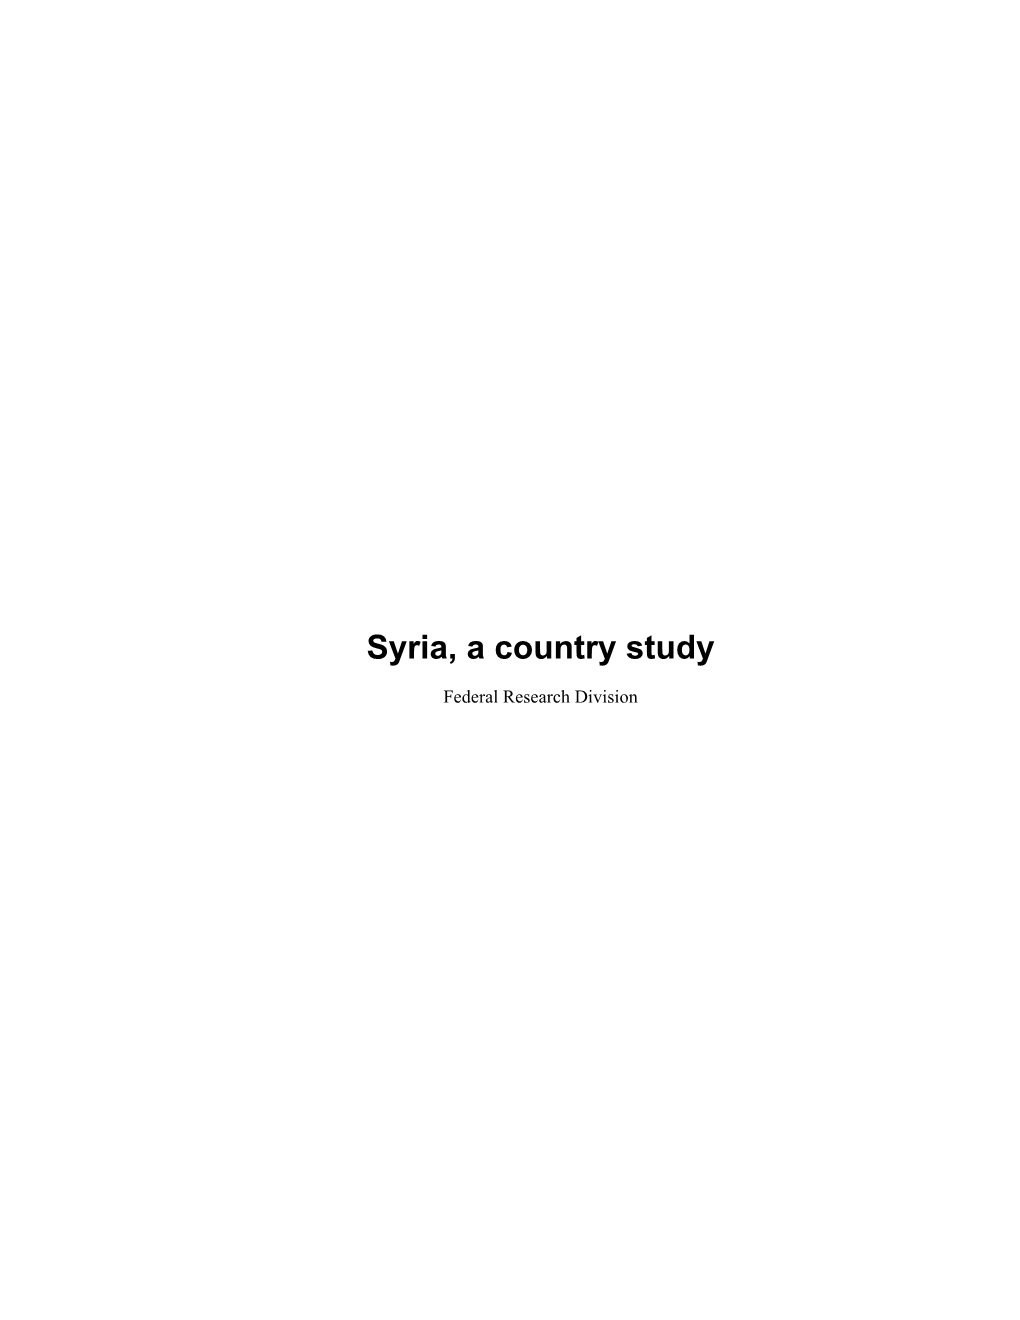 Syria, a Country Study